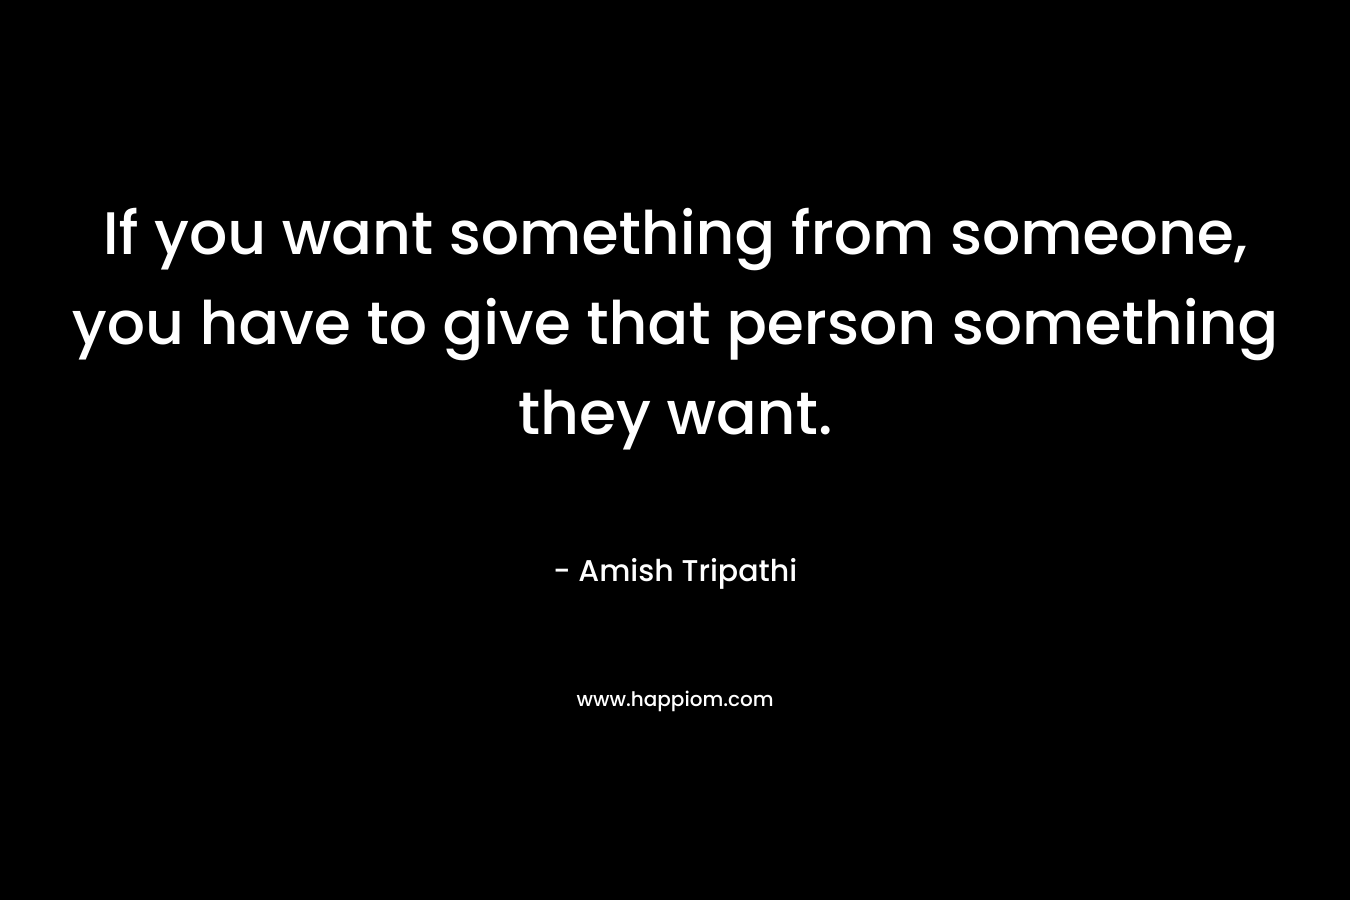 If you want something from someone, you have to give that person something they want.